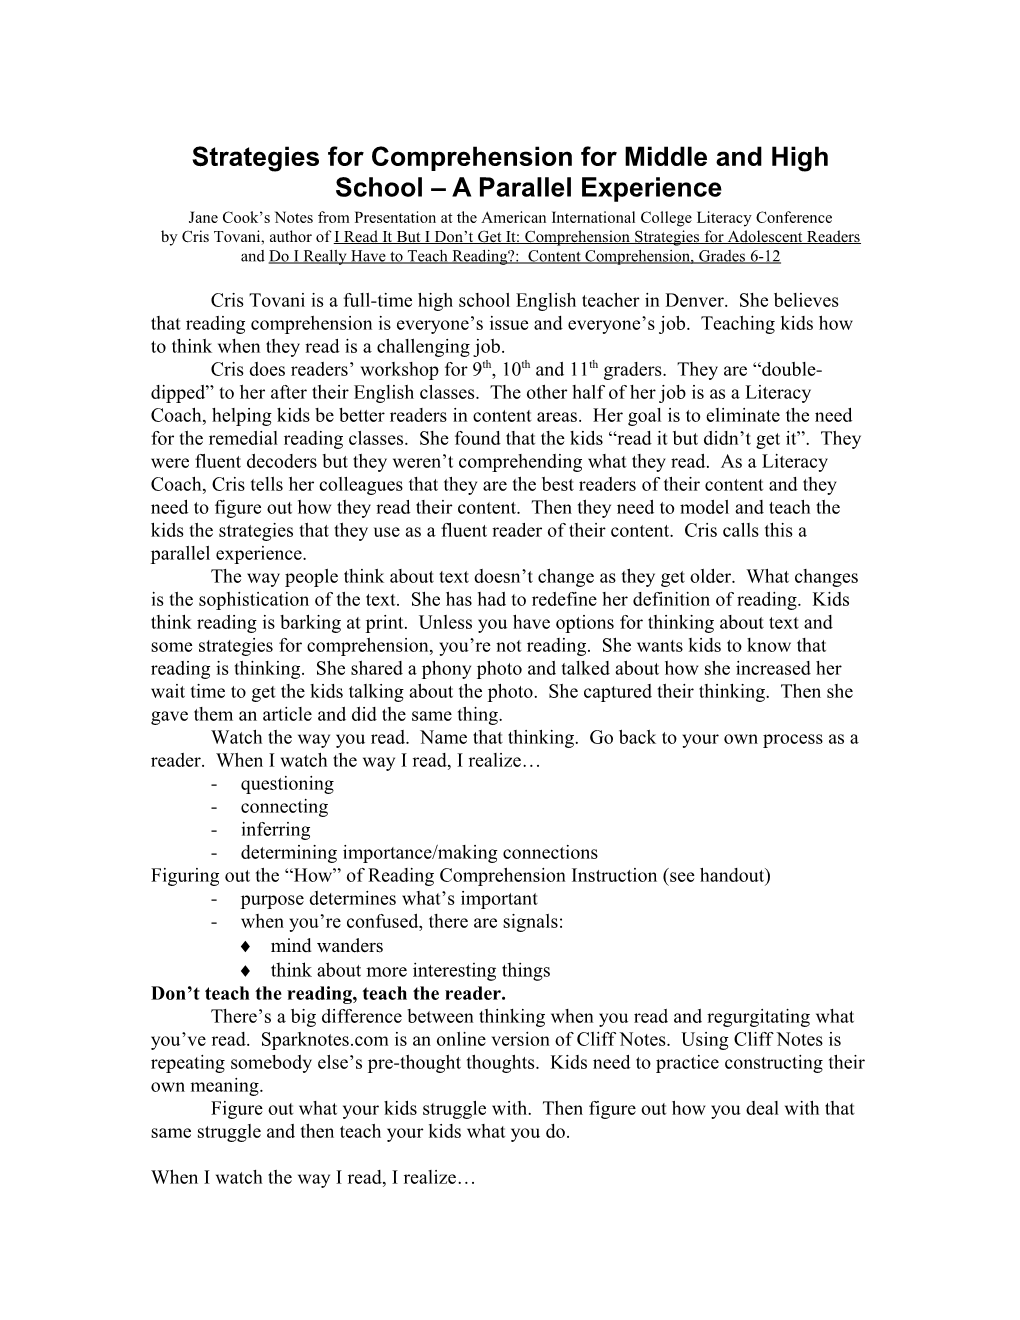 Strategies for Comprehension for Middle and High School a Parallel Experience